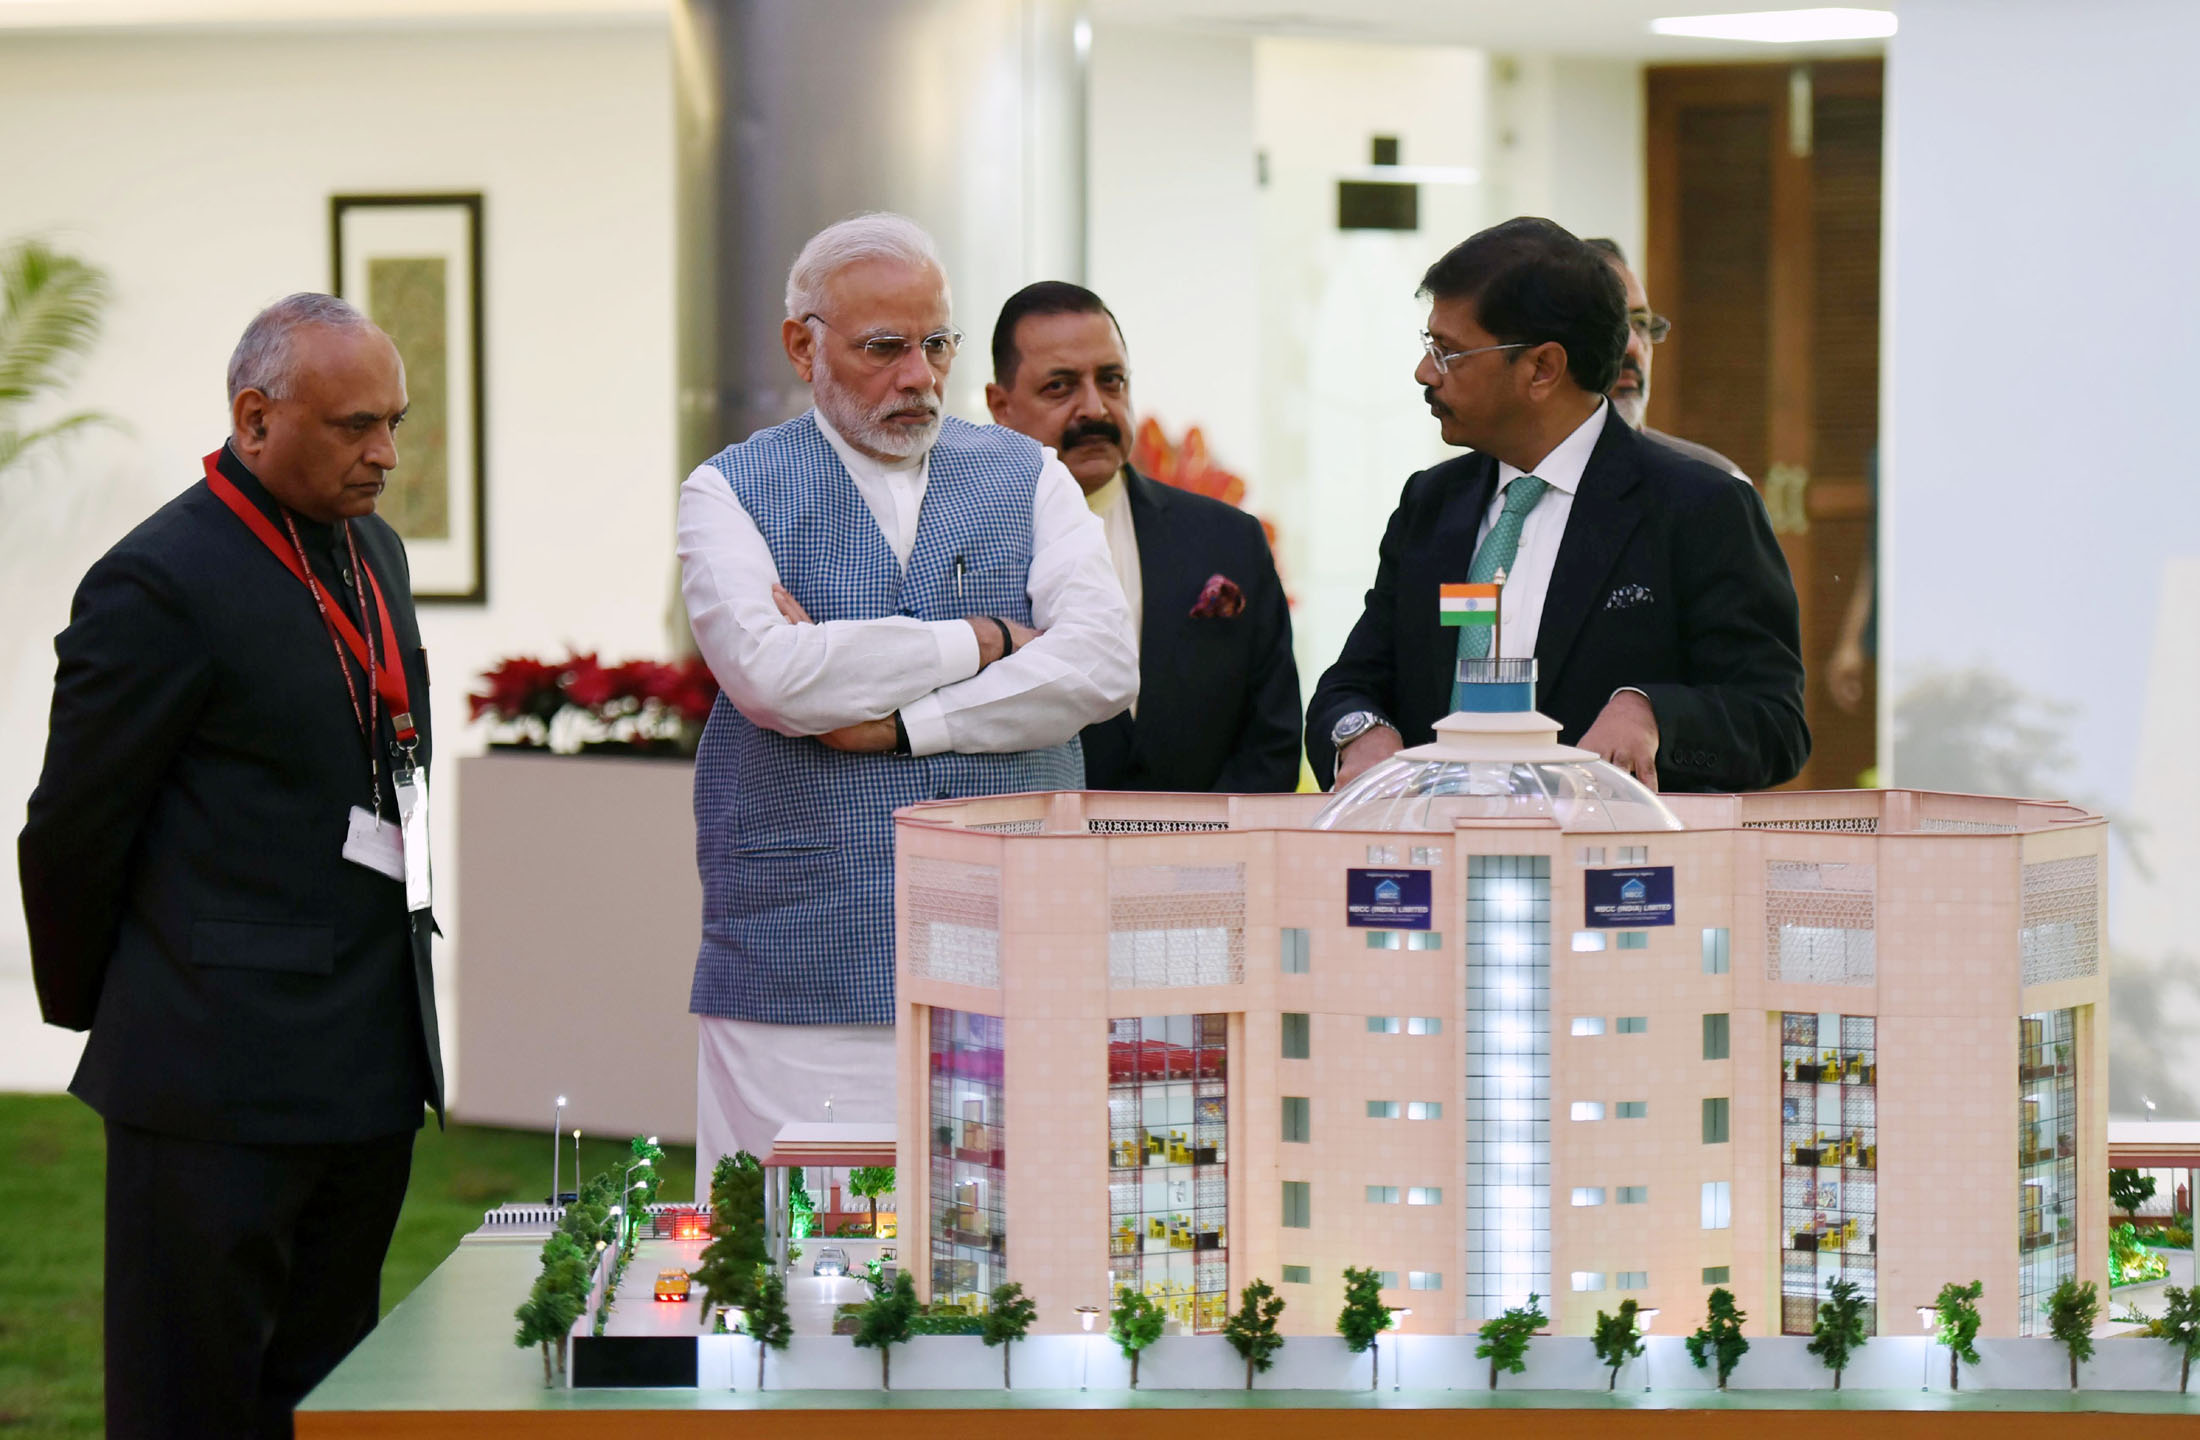 The Prime Minister, Shri Narendra Modi inaugurates the new premises of the Central Information Commission, in New Delhi on March 06, 2018. The Minister of State for Development of North Eastern Region (I/C), Prime Minister’s Office, Personnel, Public Grievances & Pensions, Atomic Energy and Space, Dr. Jitendra Singh and the Chief Information Commissioner, Shri Radha Krishna Mathur are also seen.